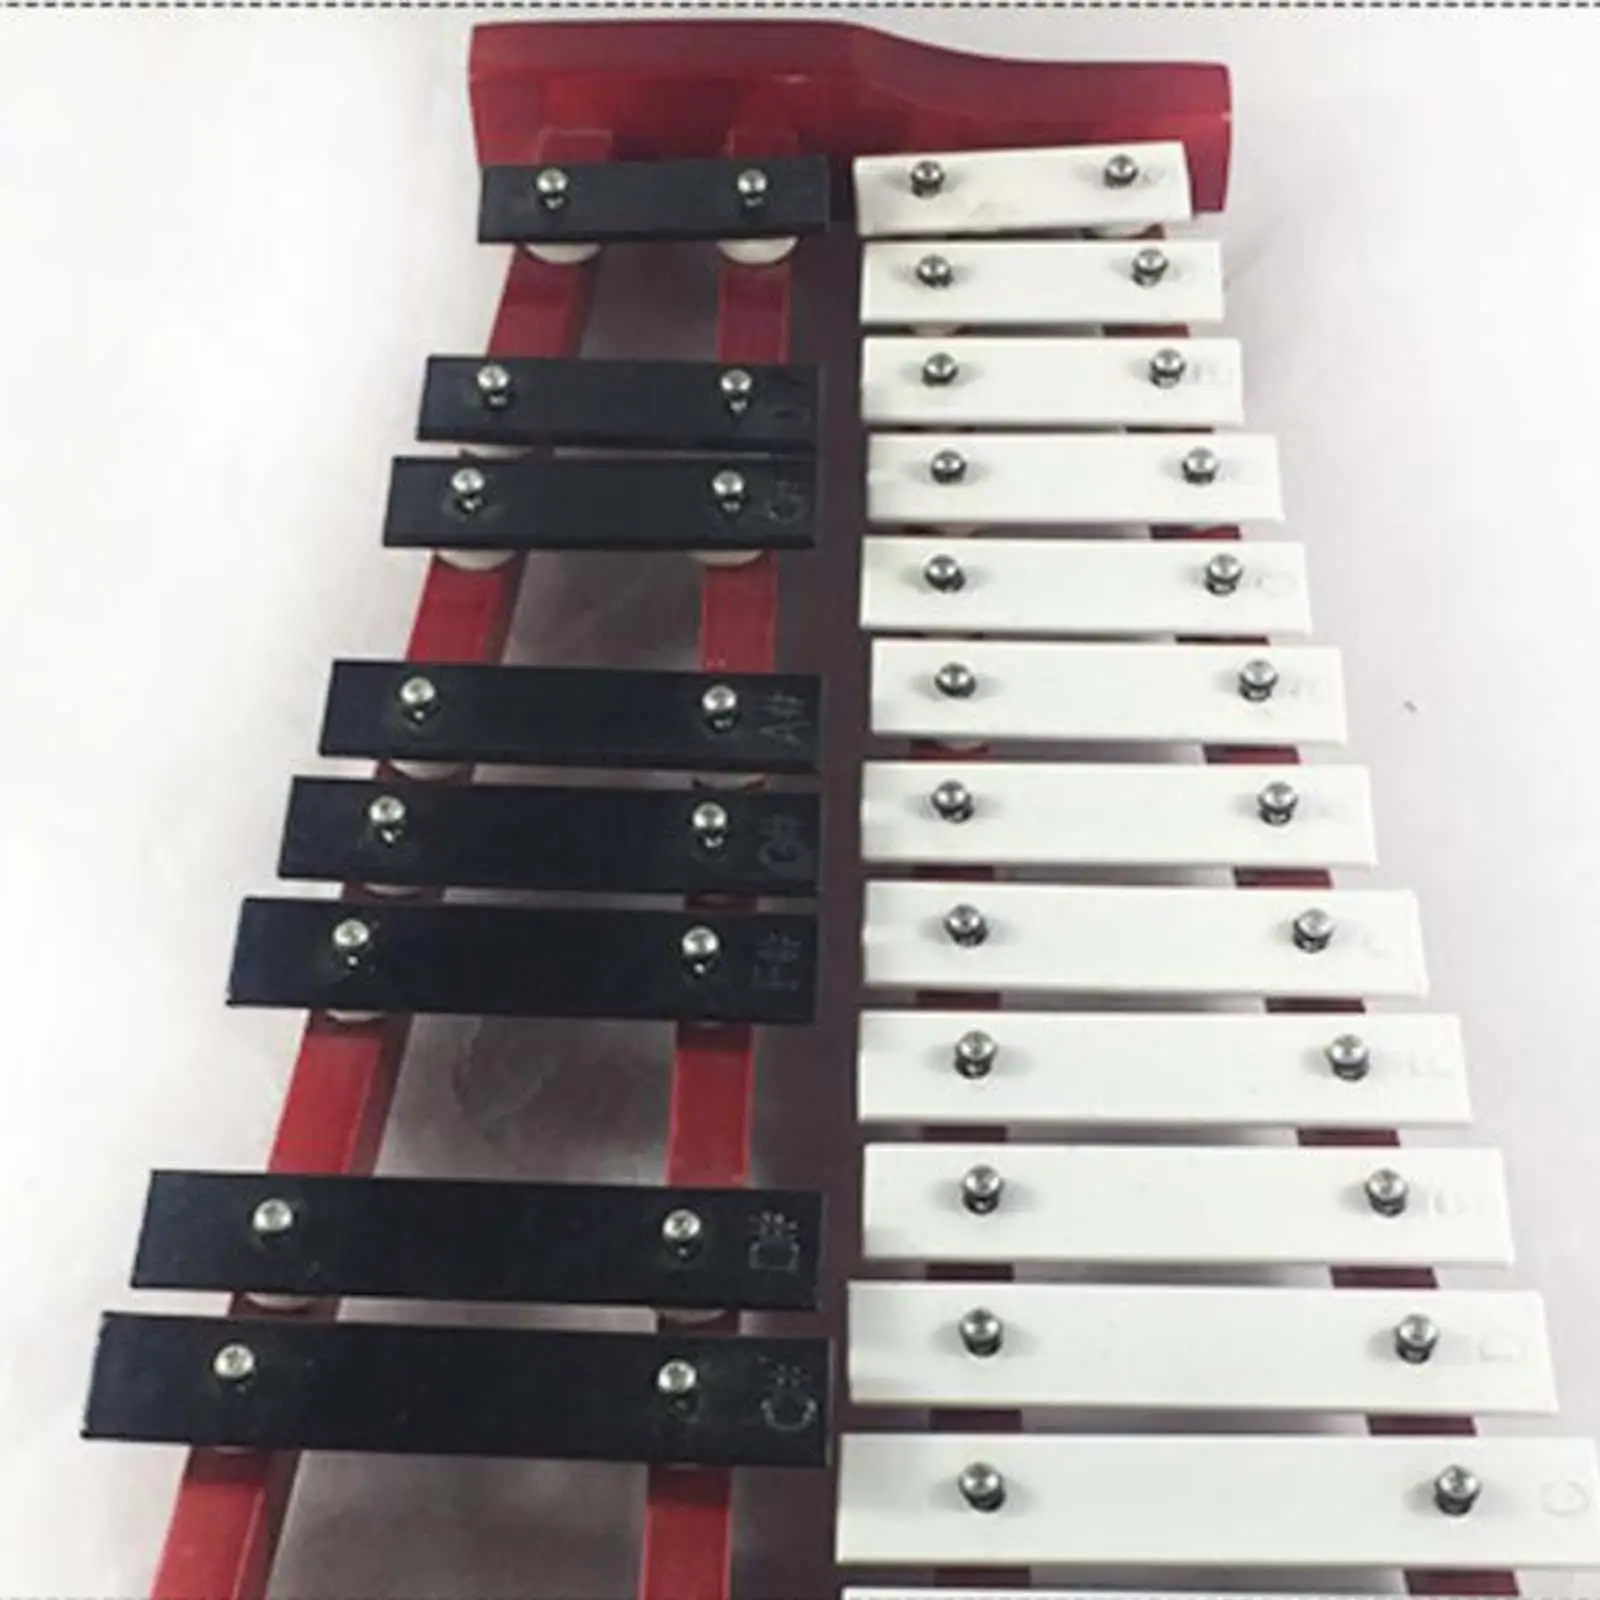 25 Key Glockenspiel Xylophone Percussion Instrument for Beginners Compact